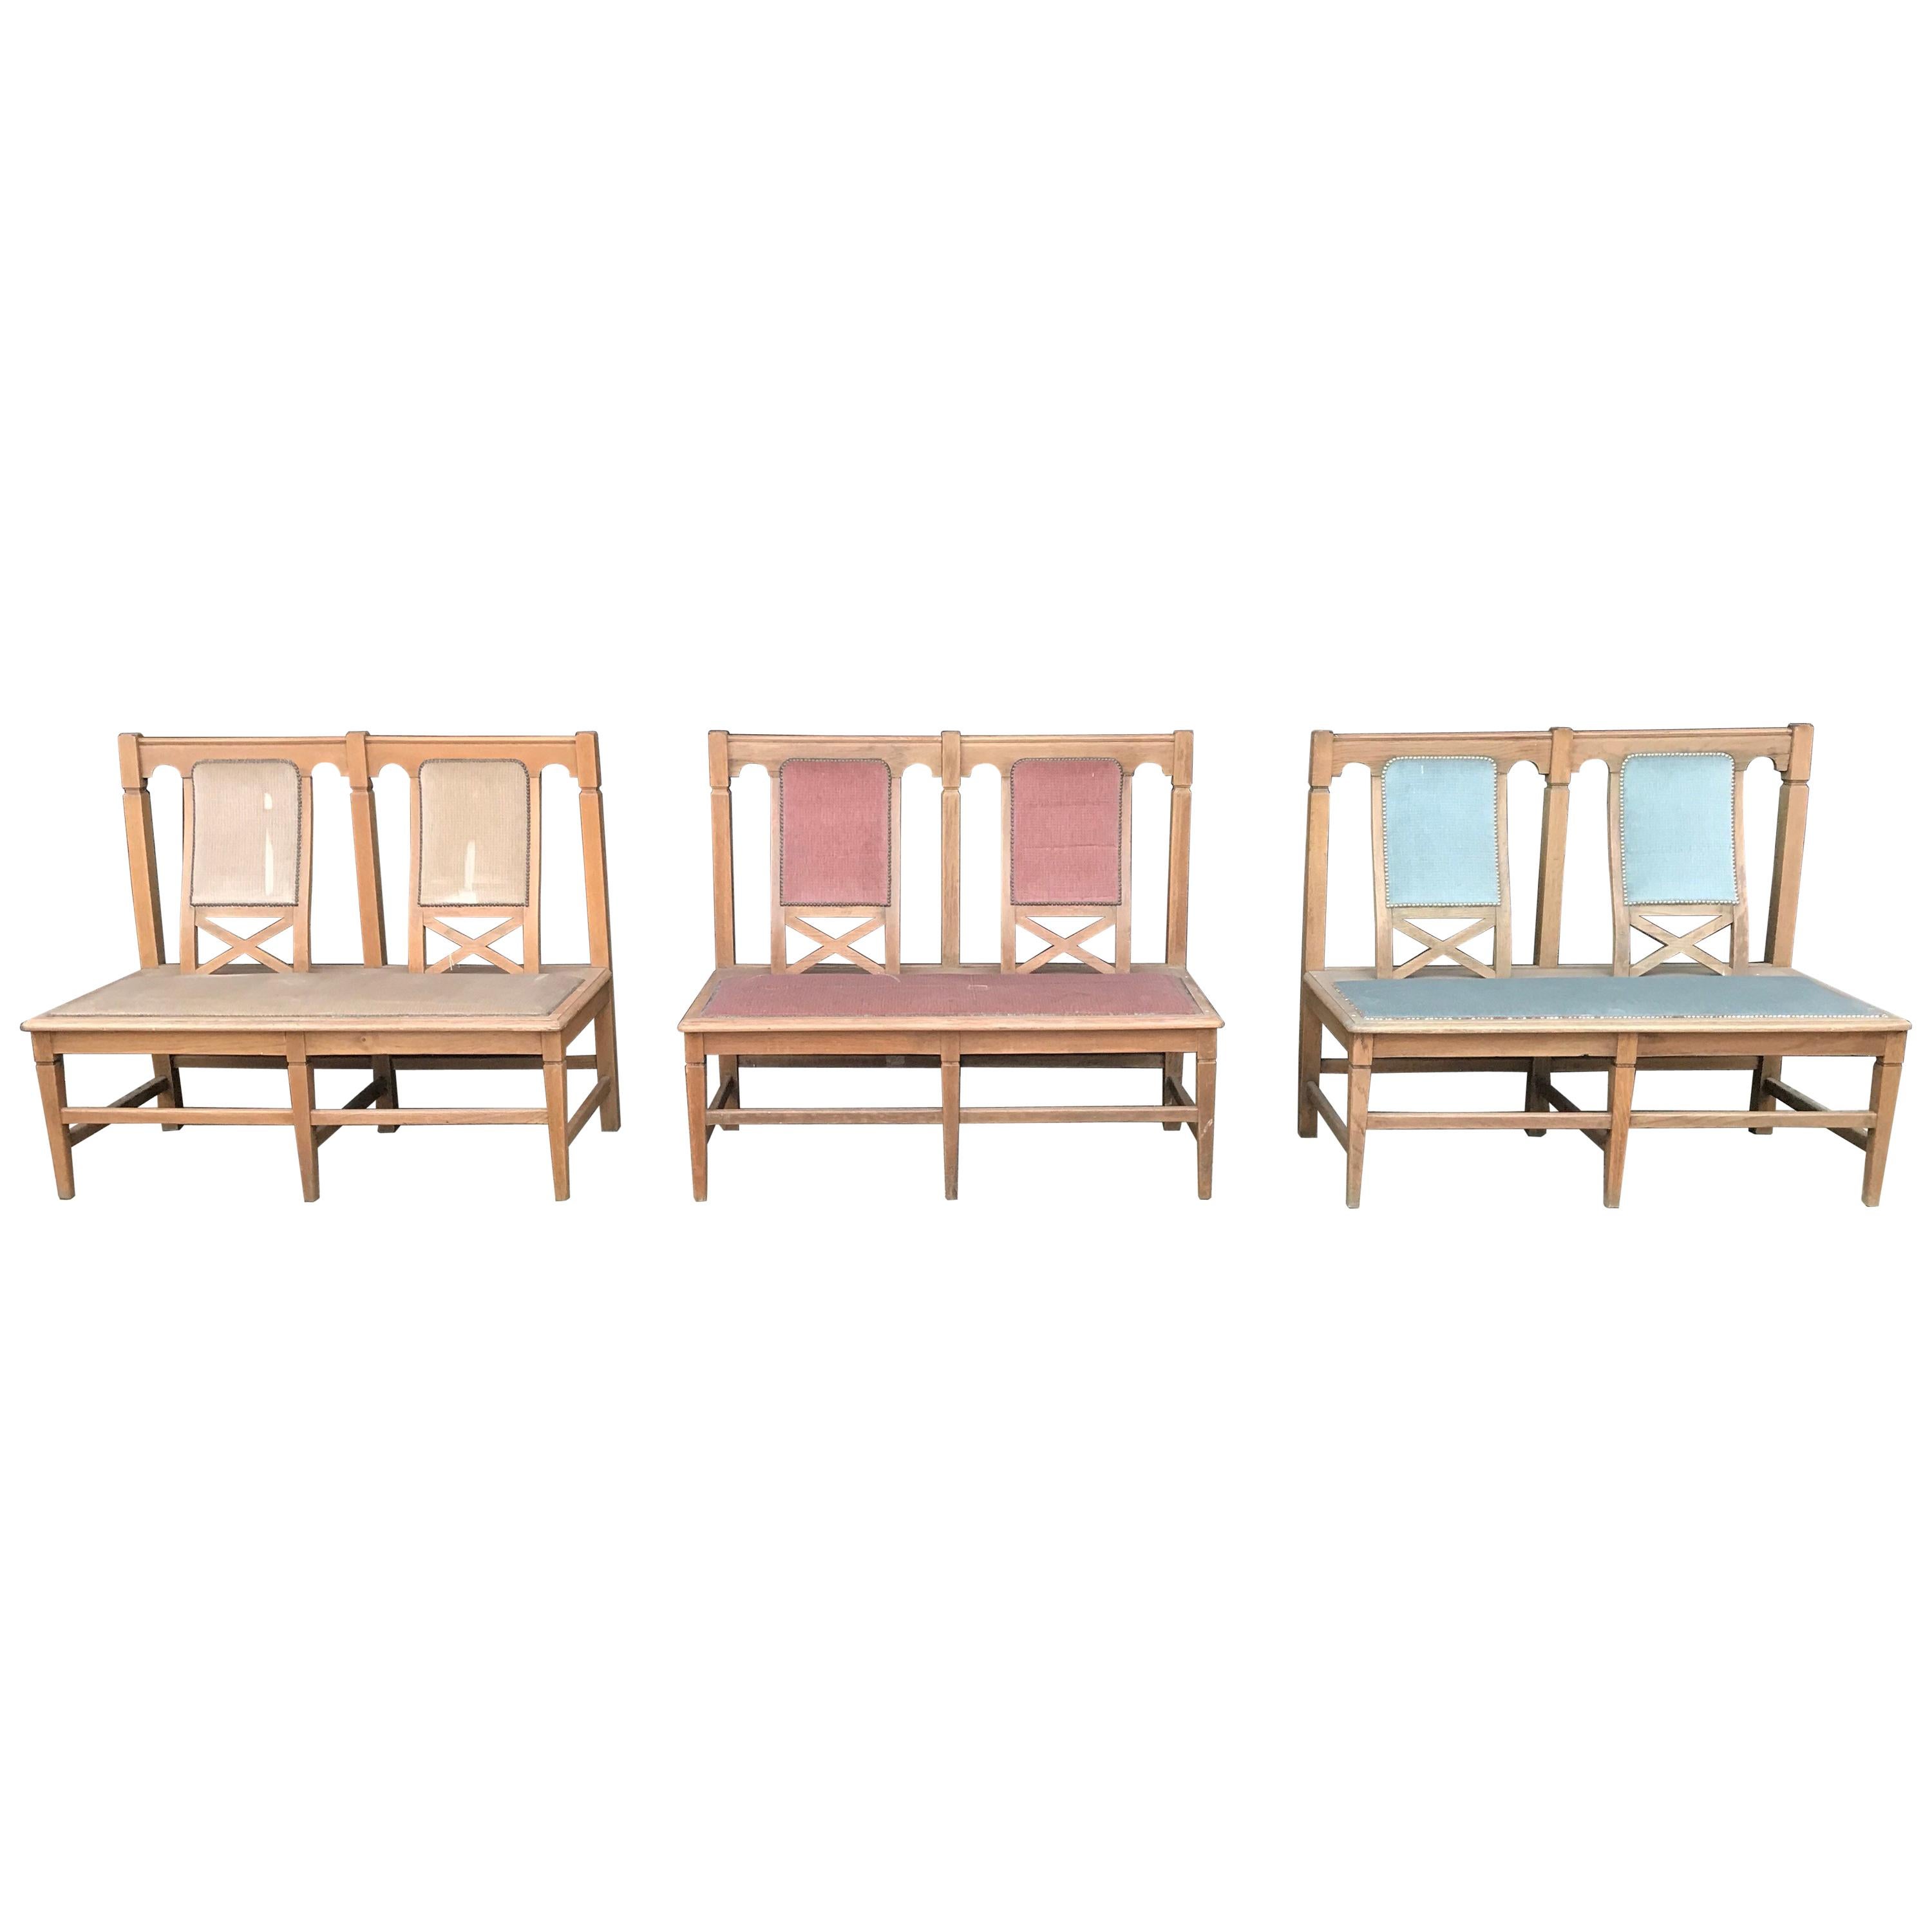 Six Arts & Crafts Matching Oak Cafe Settles or Loveseats with Shaped Back Rests